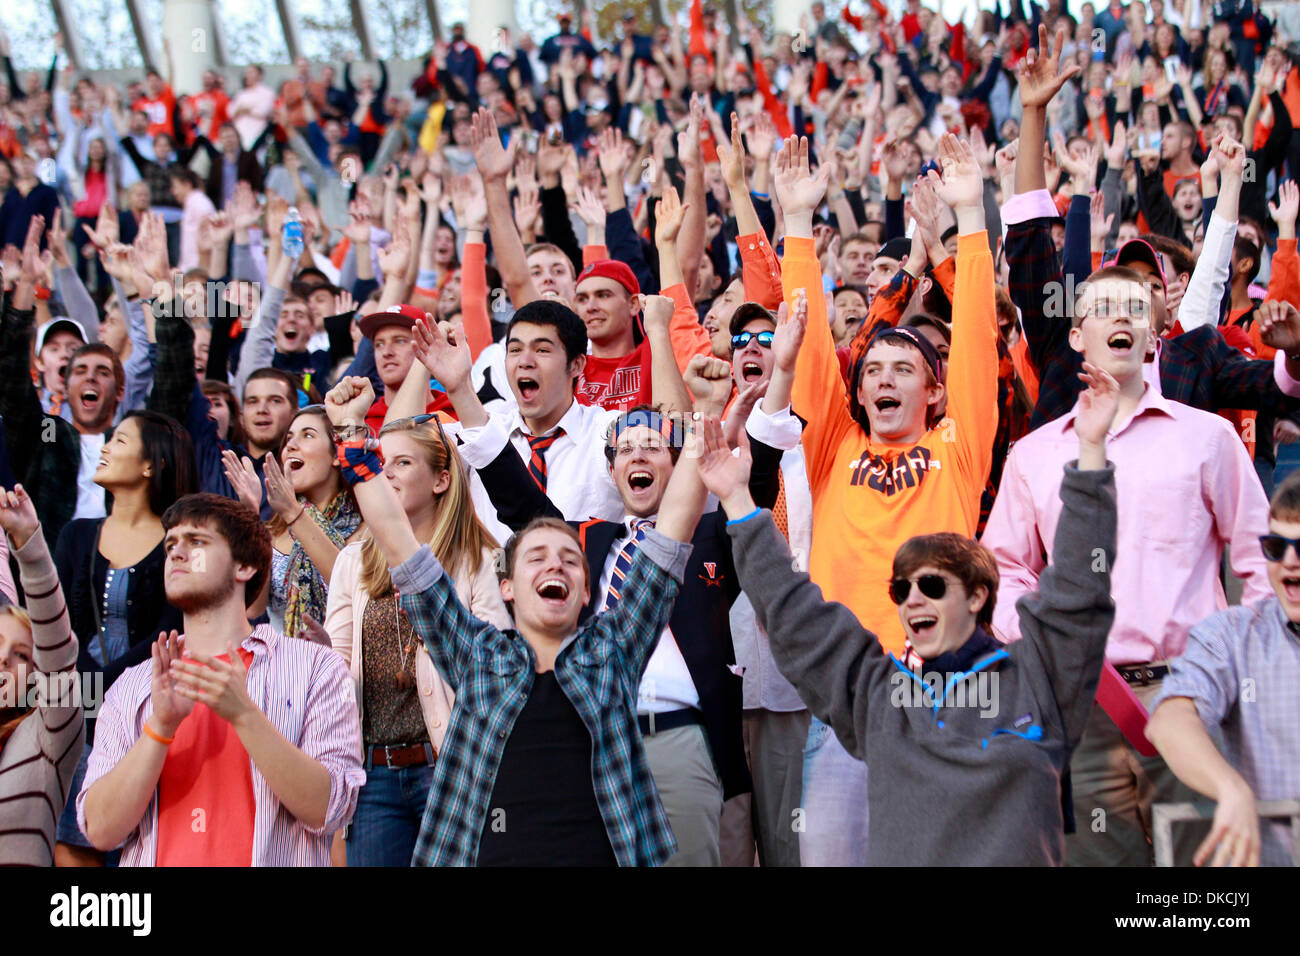 Oct. 22, 2011 - Charlottesville, Virginia, U.S. - Virginia Cavaliers fans cheer during an NCAA football game against North Carolina State Wolfpack at the Scott Stadium. NC State defeated Virginia 28-14. (Credit Image: © Andrew Shurtleff/ZUMAPRESS.com) Stock Photo